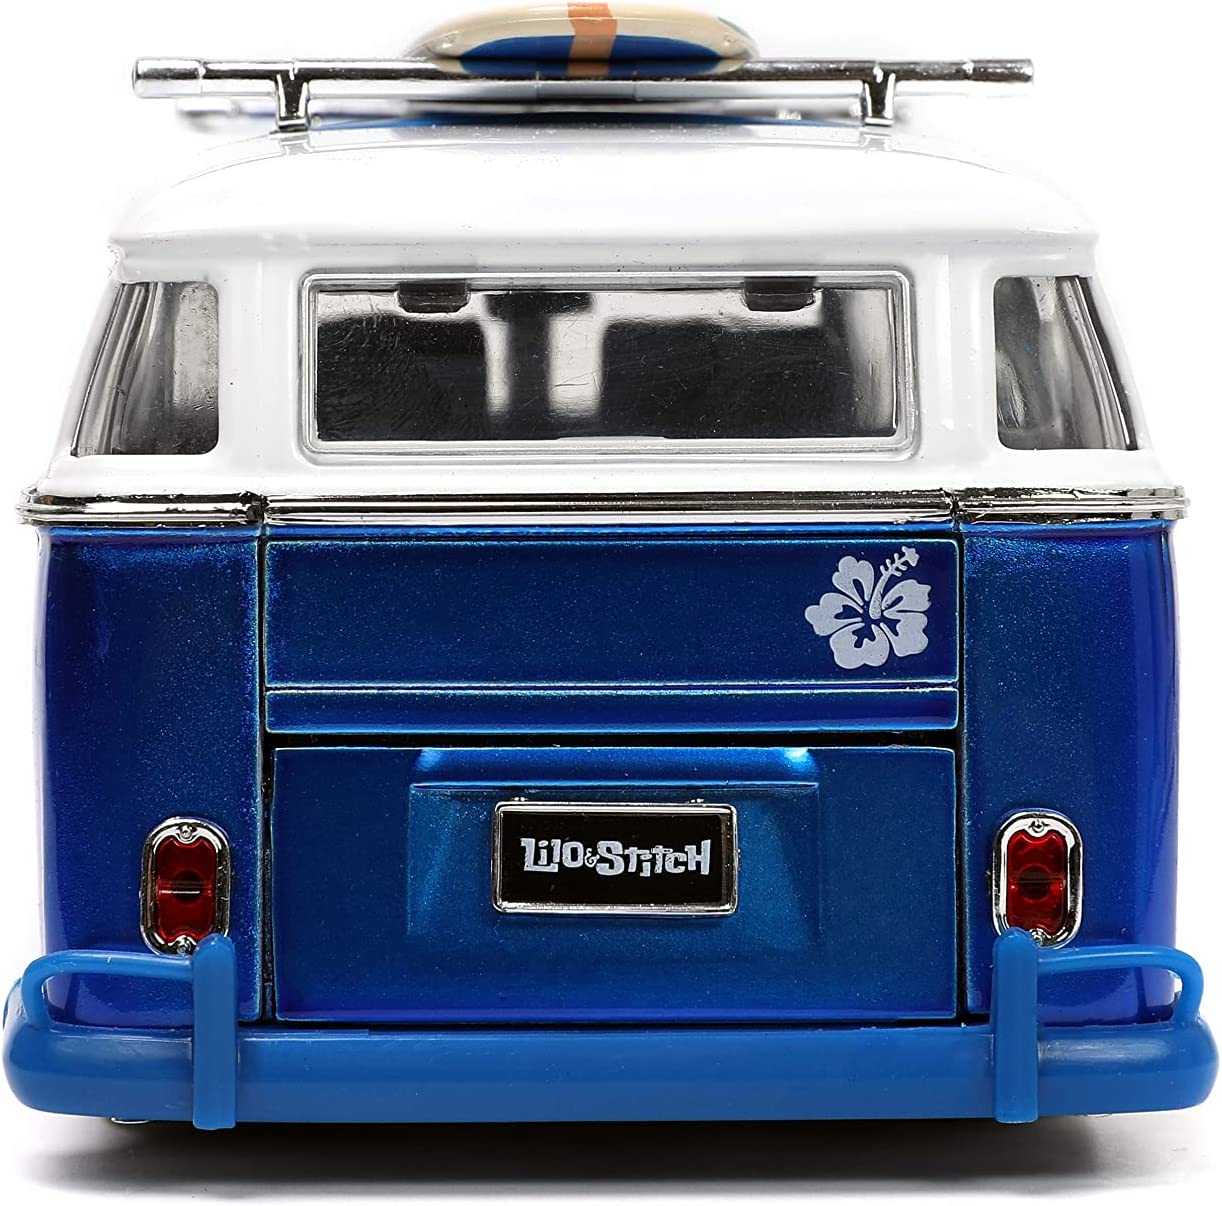 1962 VOLKSWAGEN BUS WITH MICKEY MOUSE u0026 FRIENDS FIGURE HOLLYWOOD RIDES 1/24  SCALE DIECAST CAR MODEL BY JADA TOYS 33179